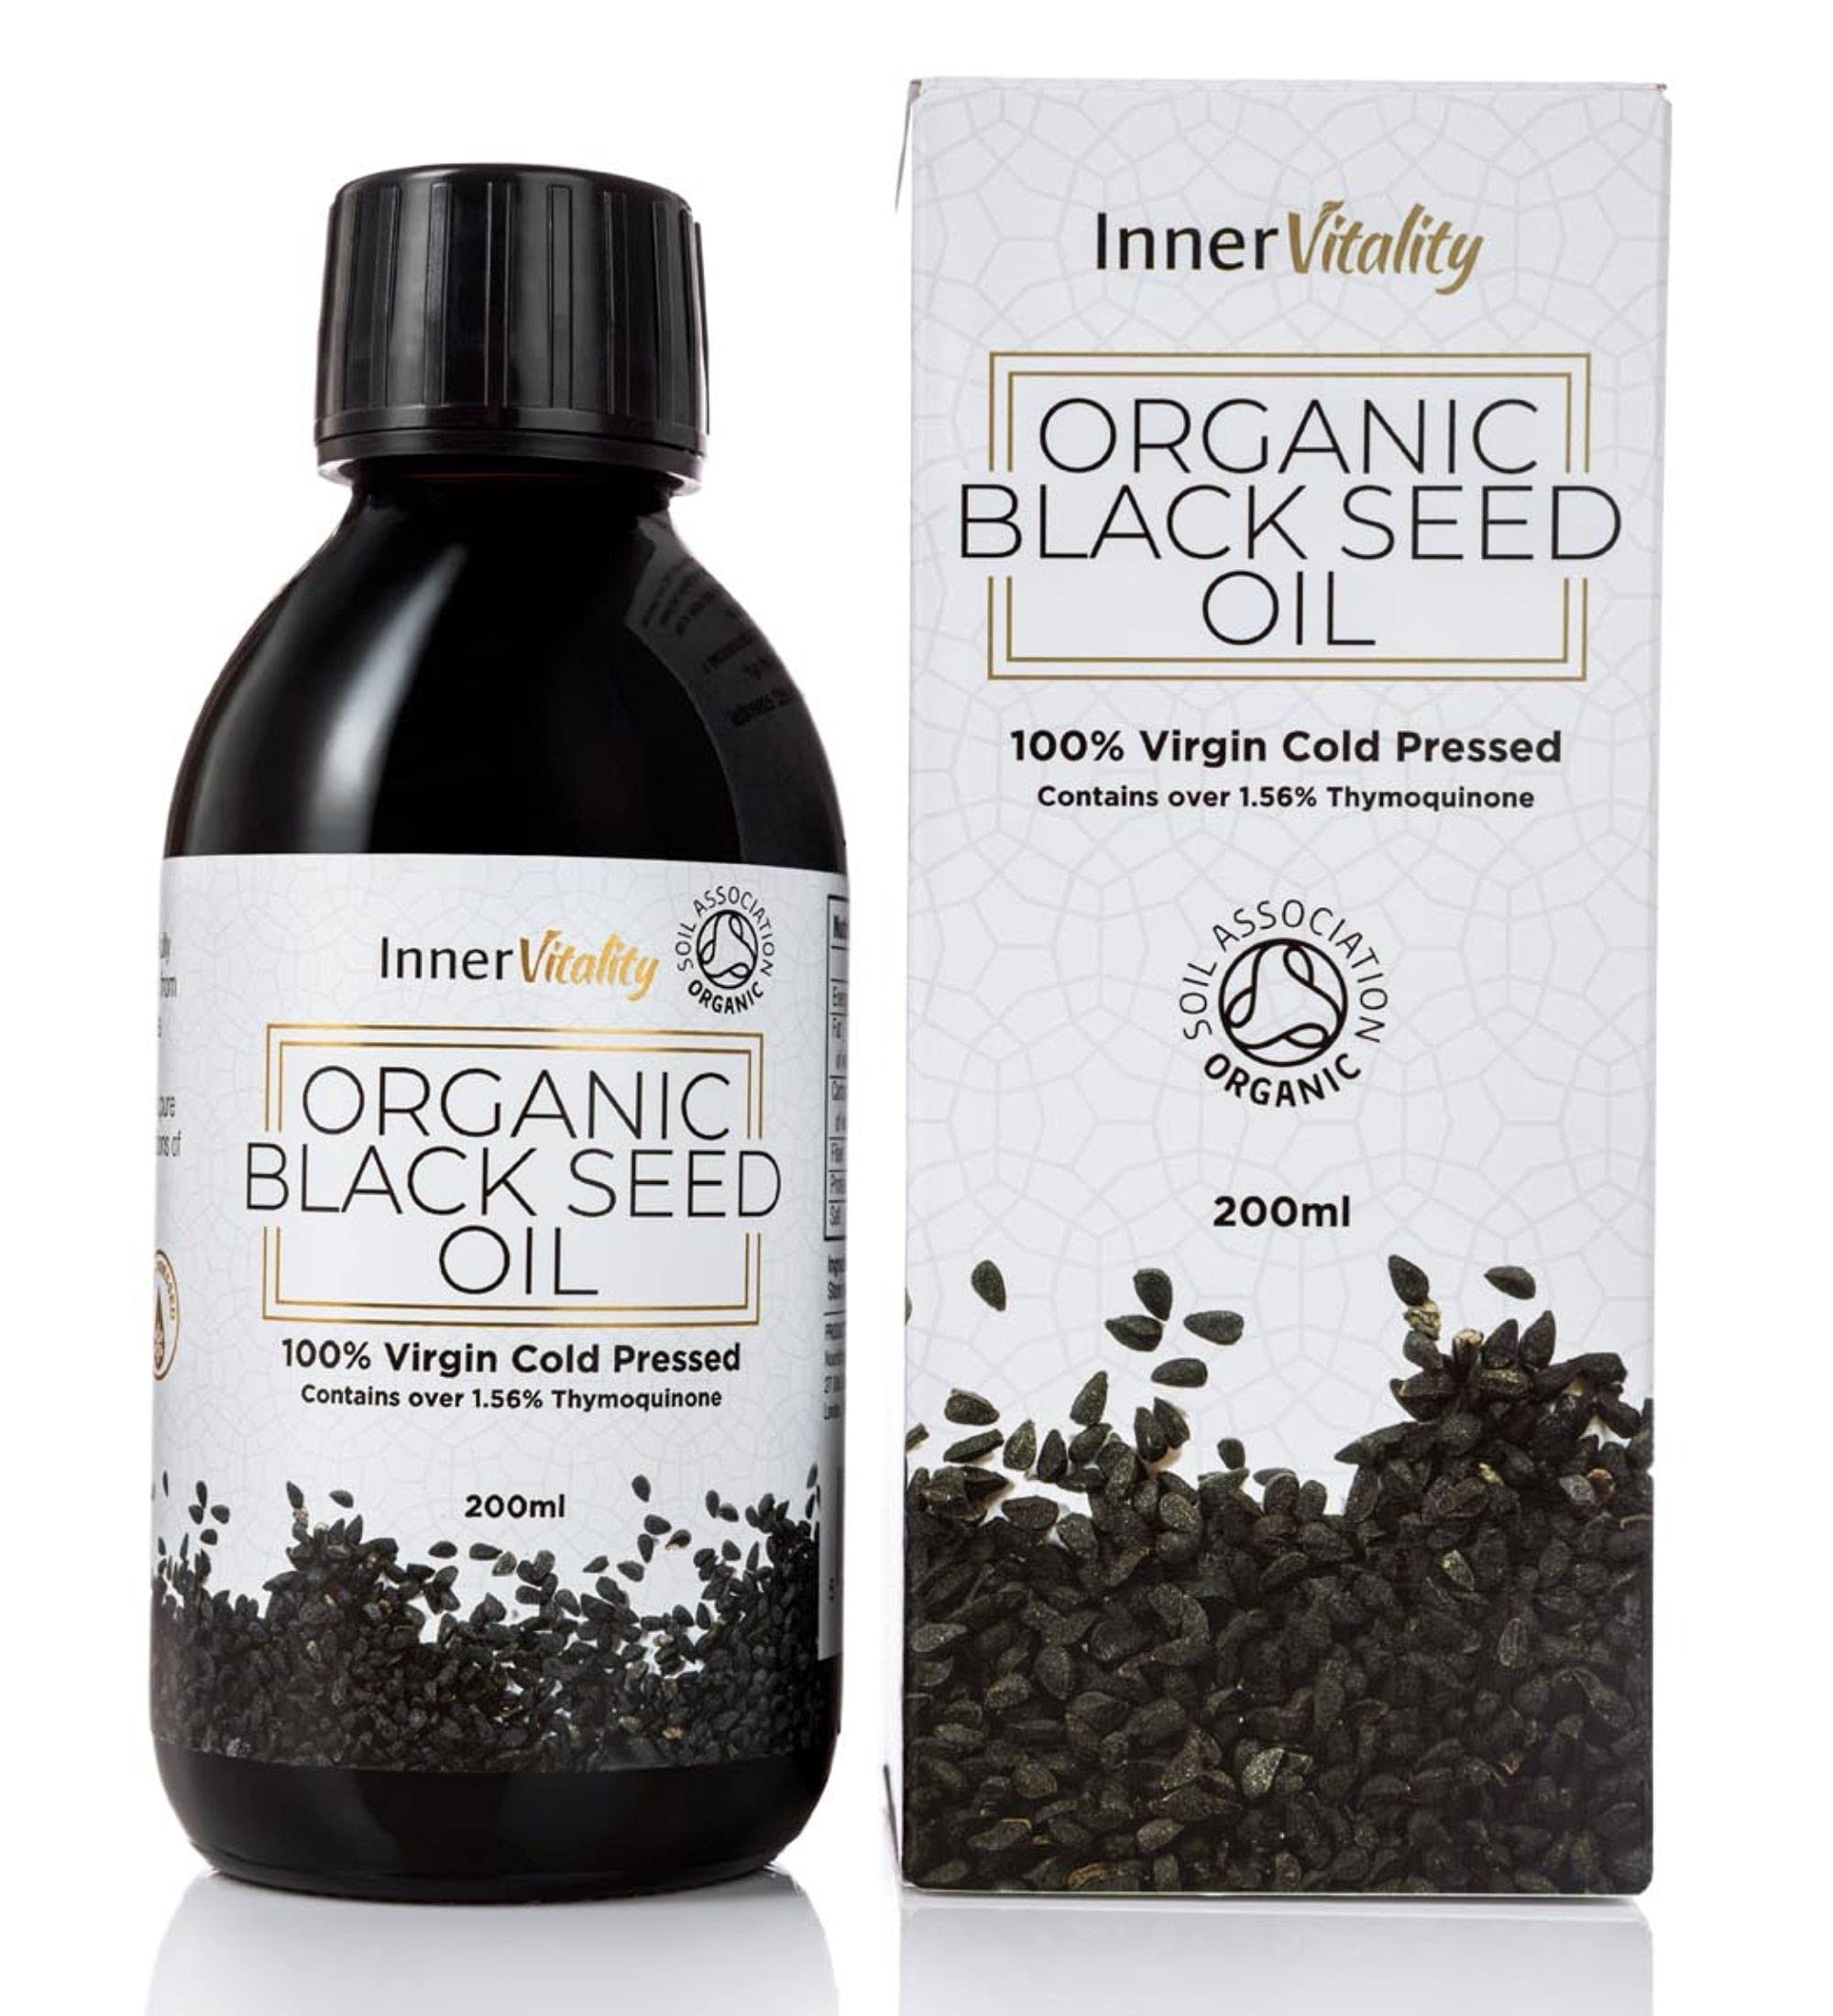 Organic Black Seed Oil Cold Pressed - 200ml High Strength 3X% - Certified Pure Virgin Oil in a Glass Bottle Rich in Omega 3 6 & 9 by Inner Vitality